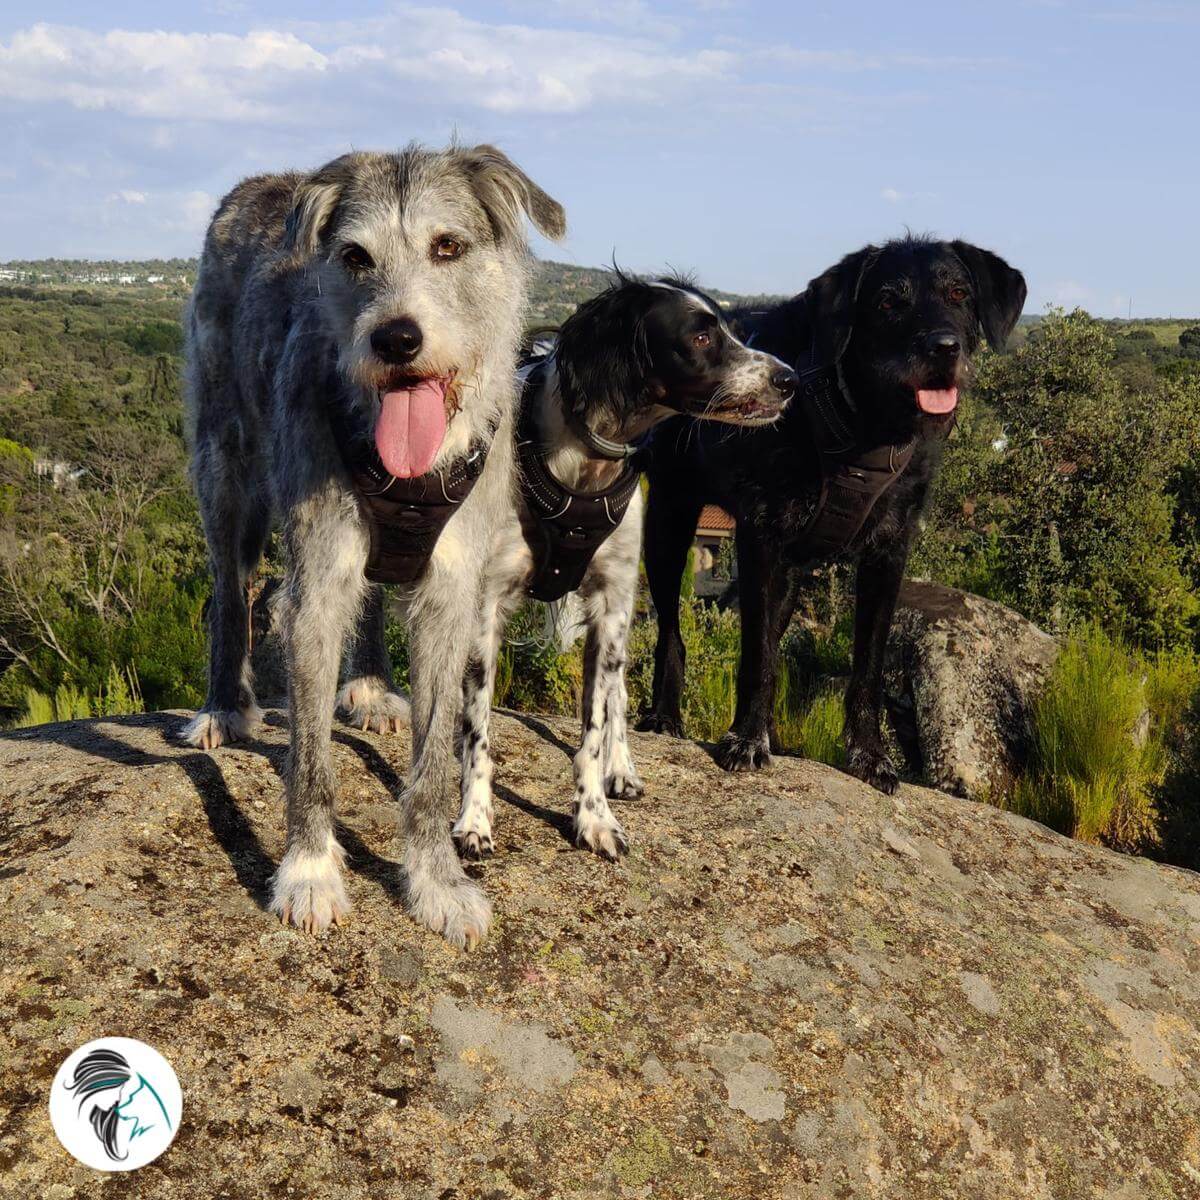 Noah and two other dogs standing on a large rock.